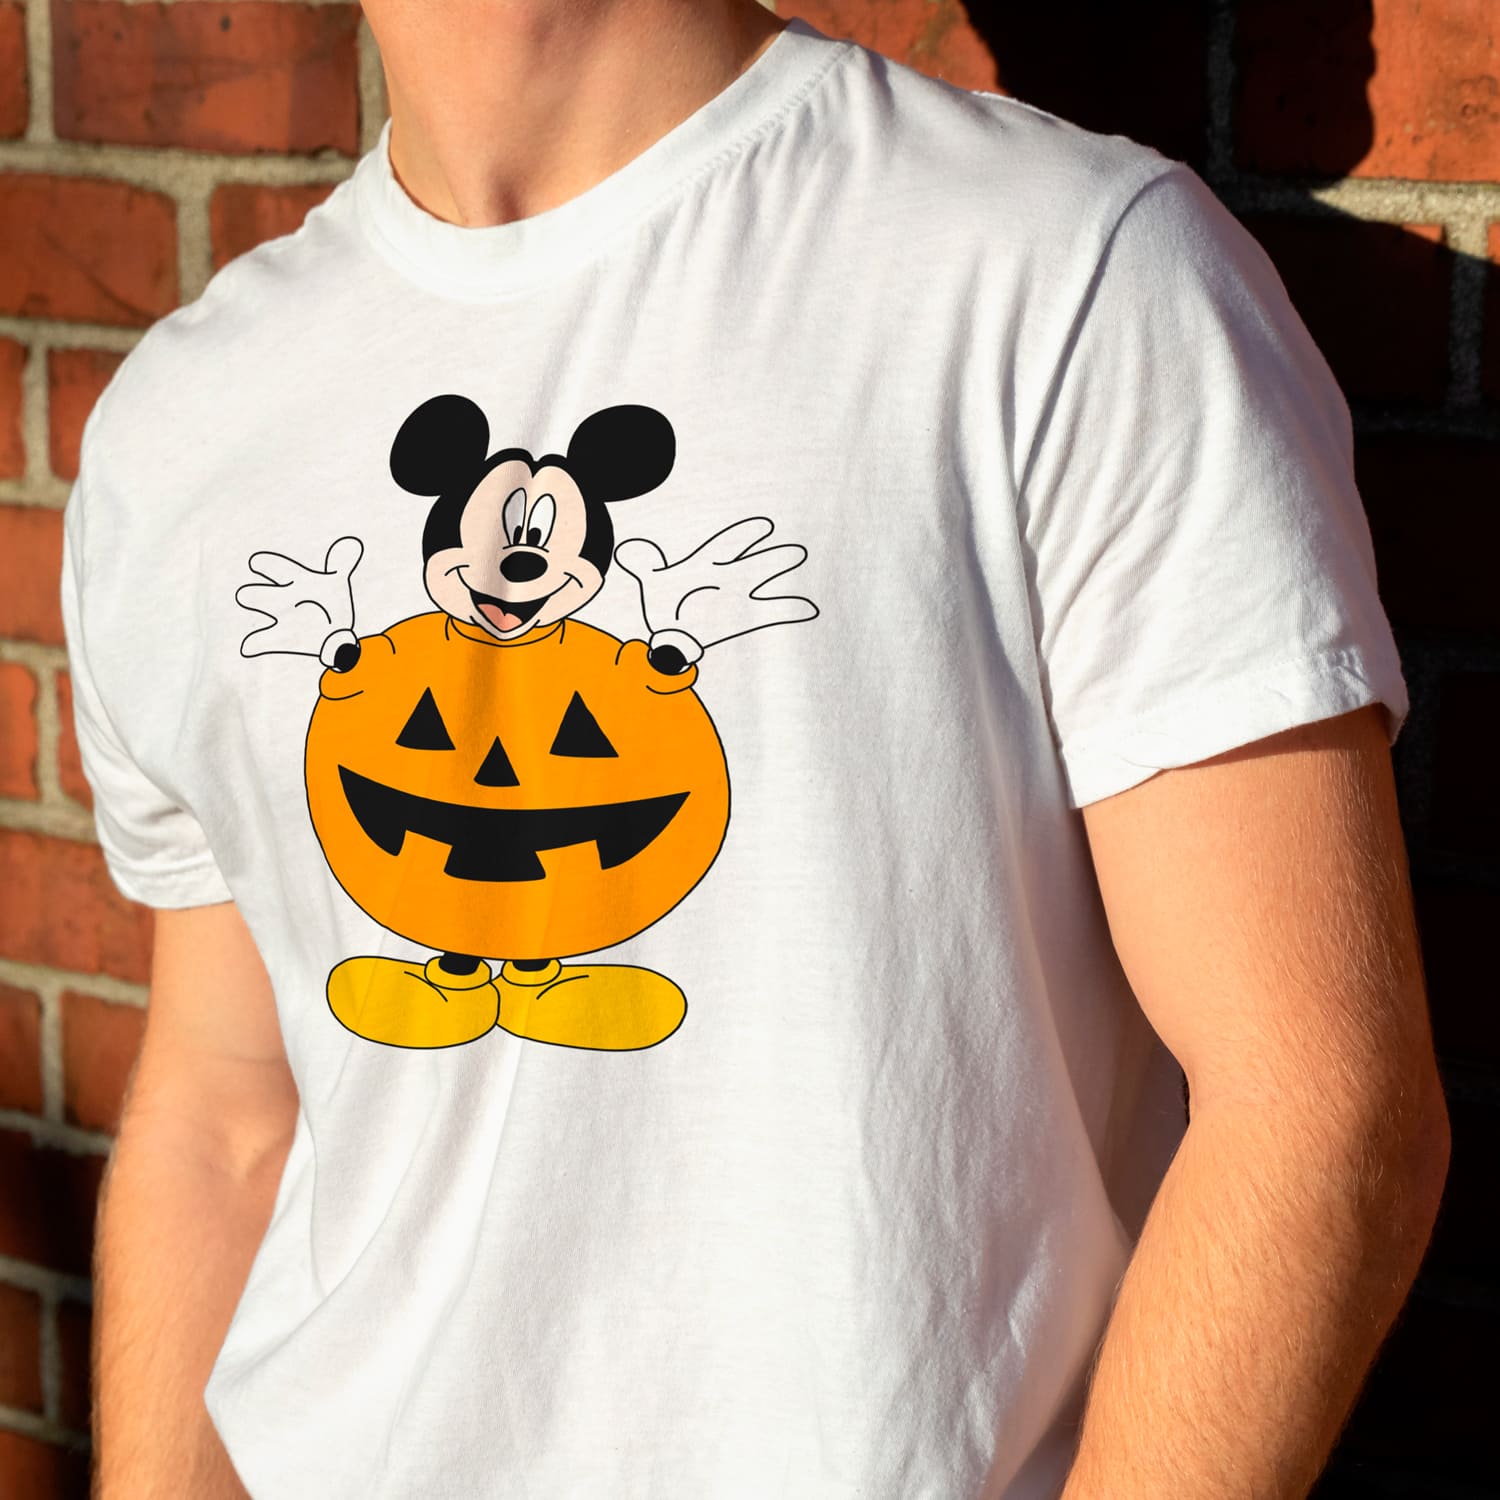 White t-shirt design with Mickey Mouse Halloween image.